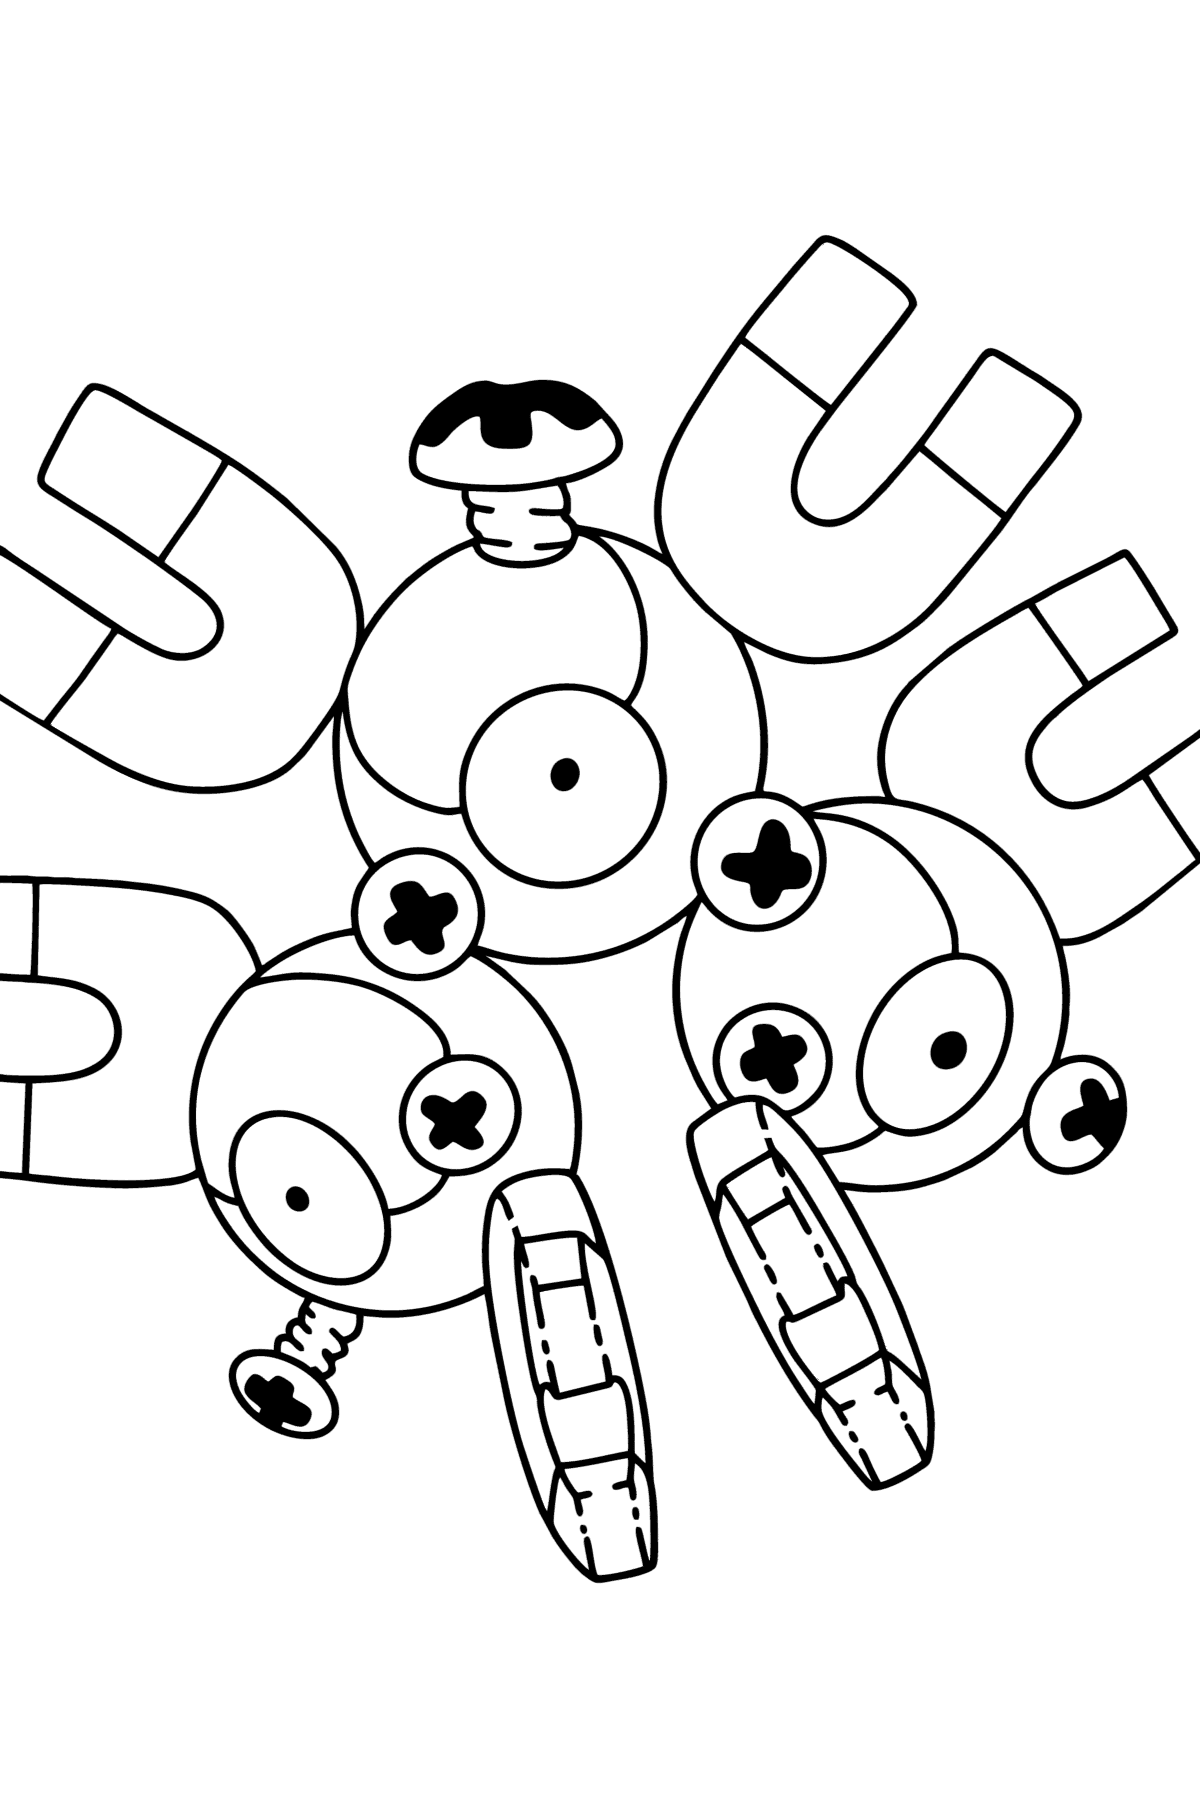 Coloring page Pokémon Go Magneton - Coloring Pages for Kids